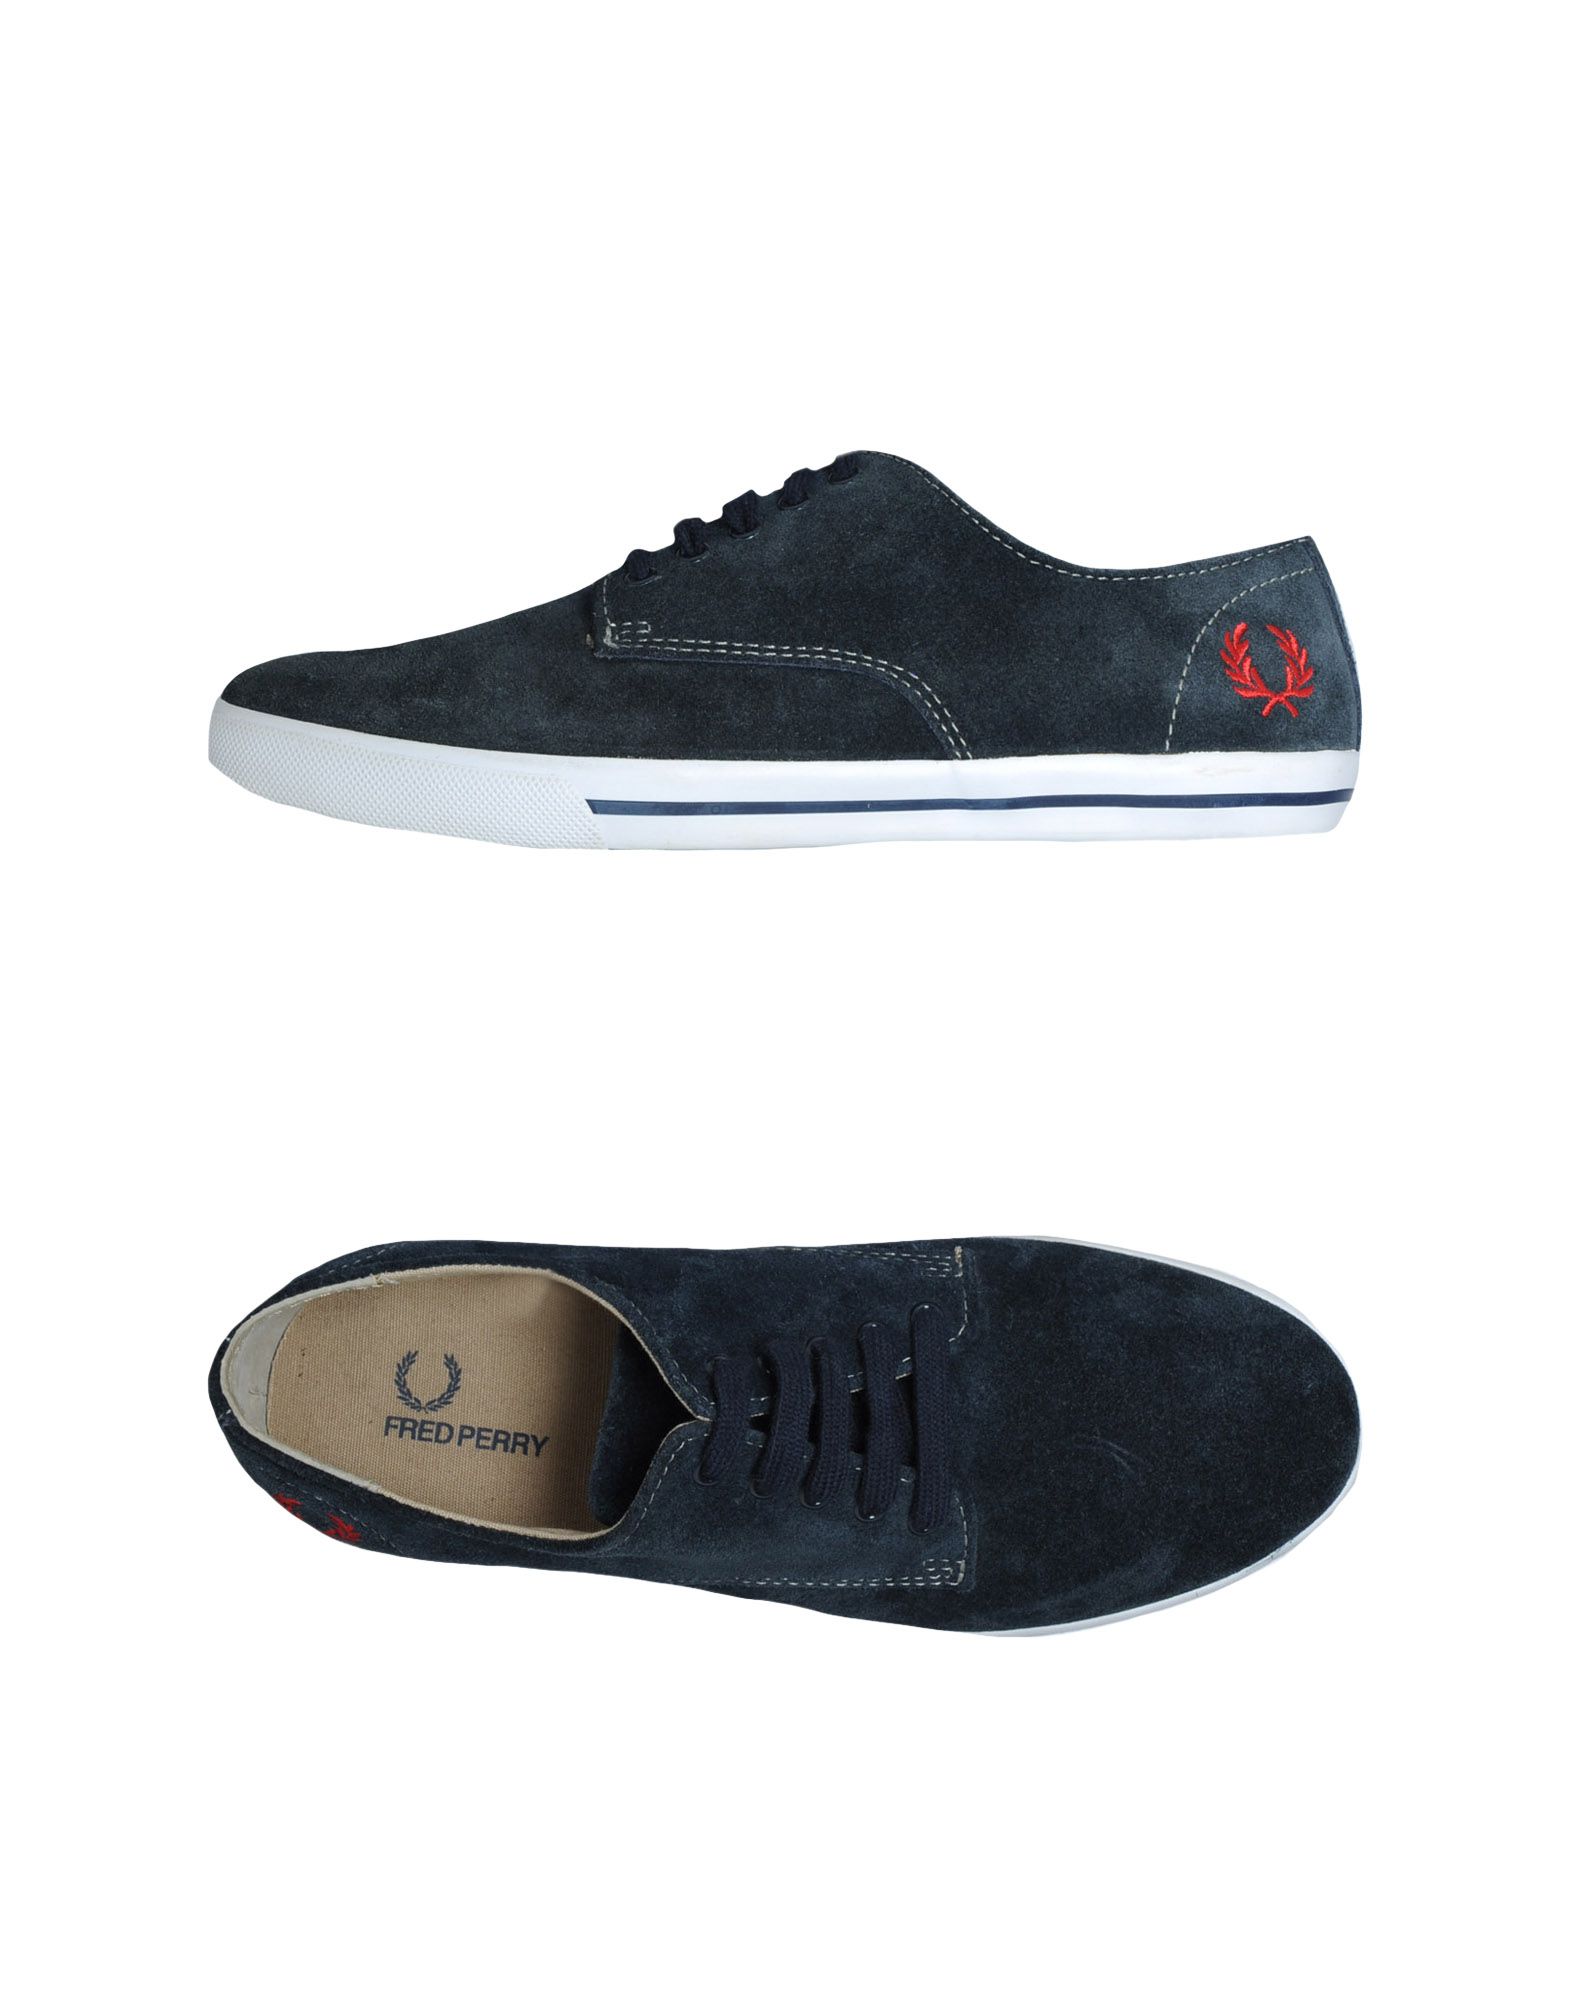 Foto fred perry sneakers
